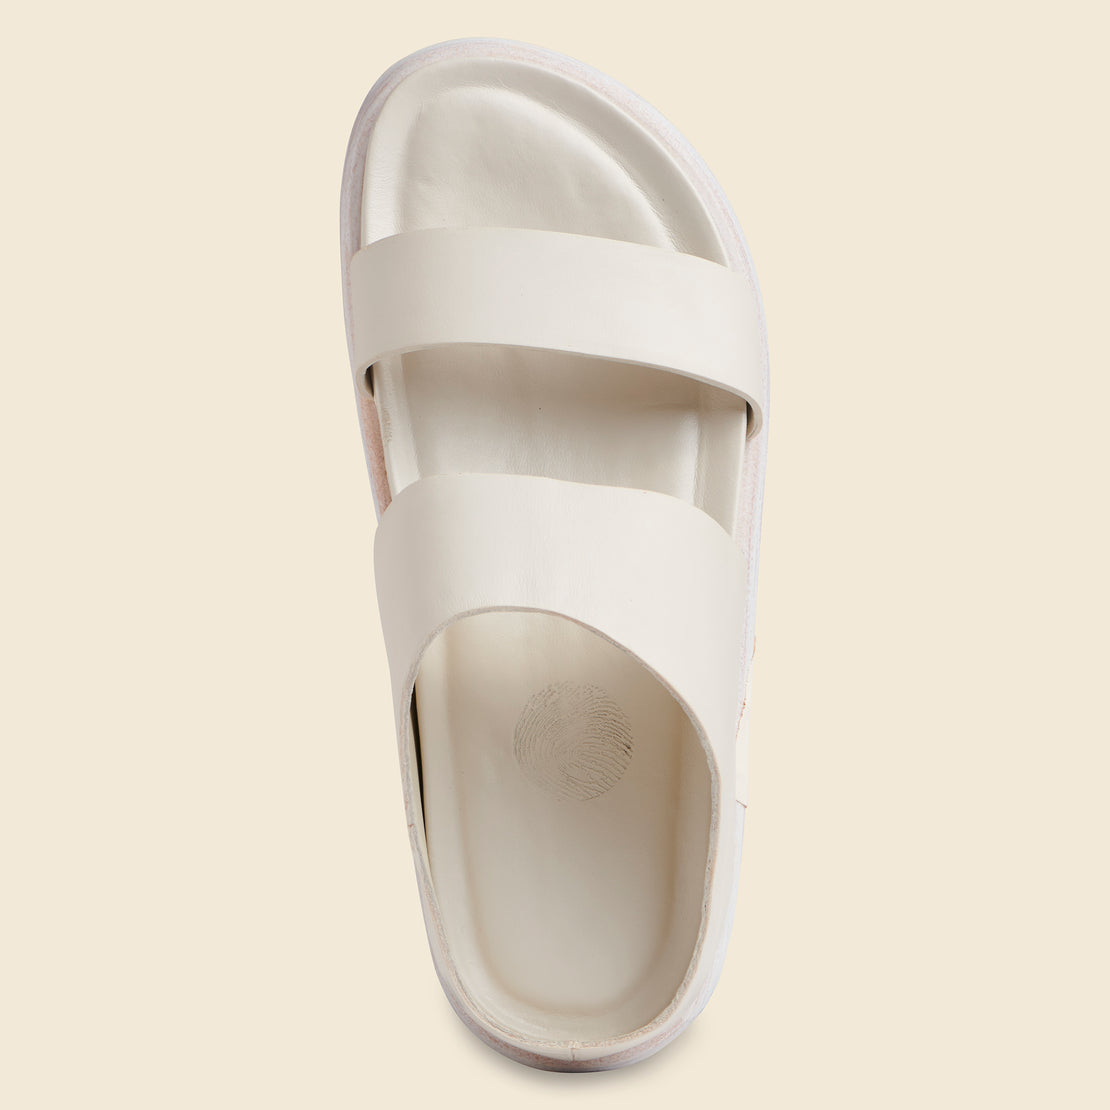 Formosa Slide - Crystal White - Wal & Pai - STAG Provisions - W - Shoes - Sandals